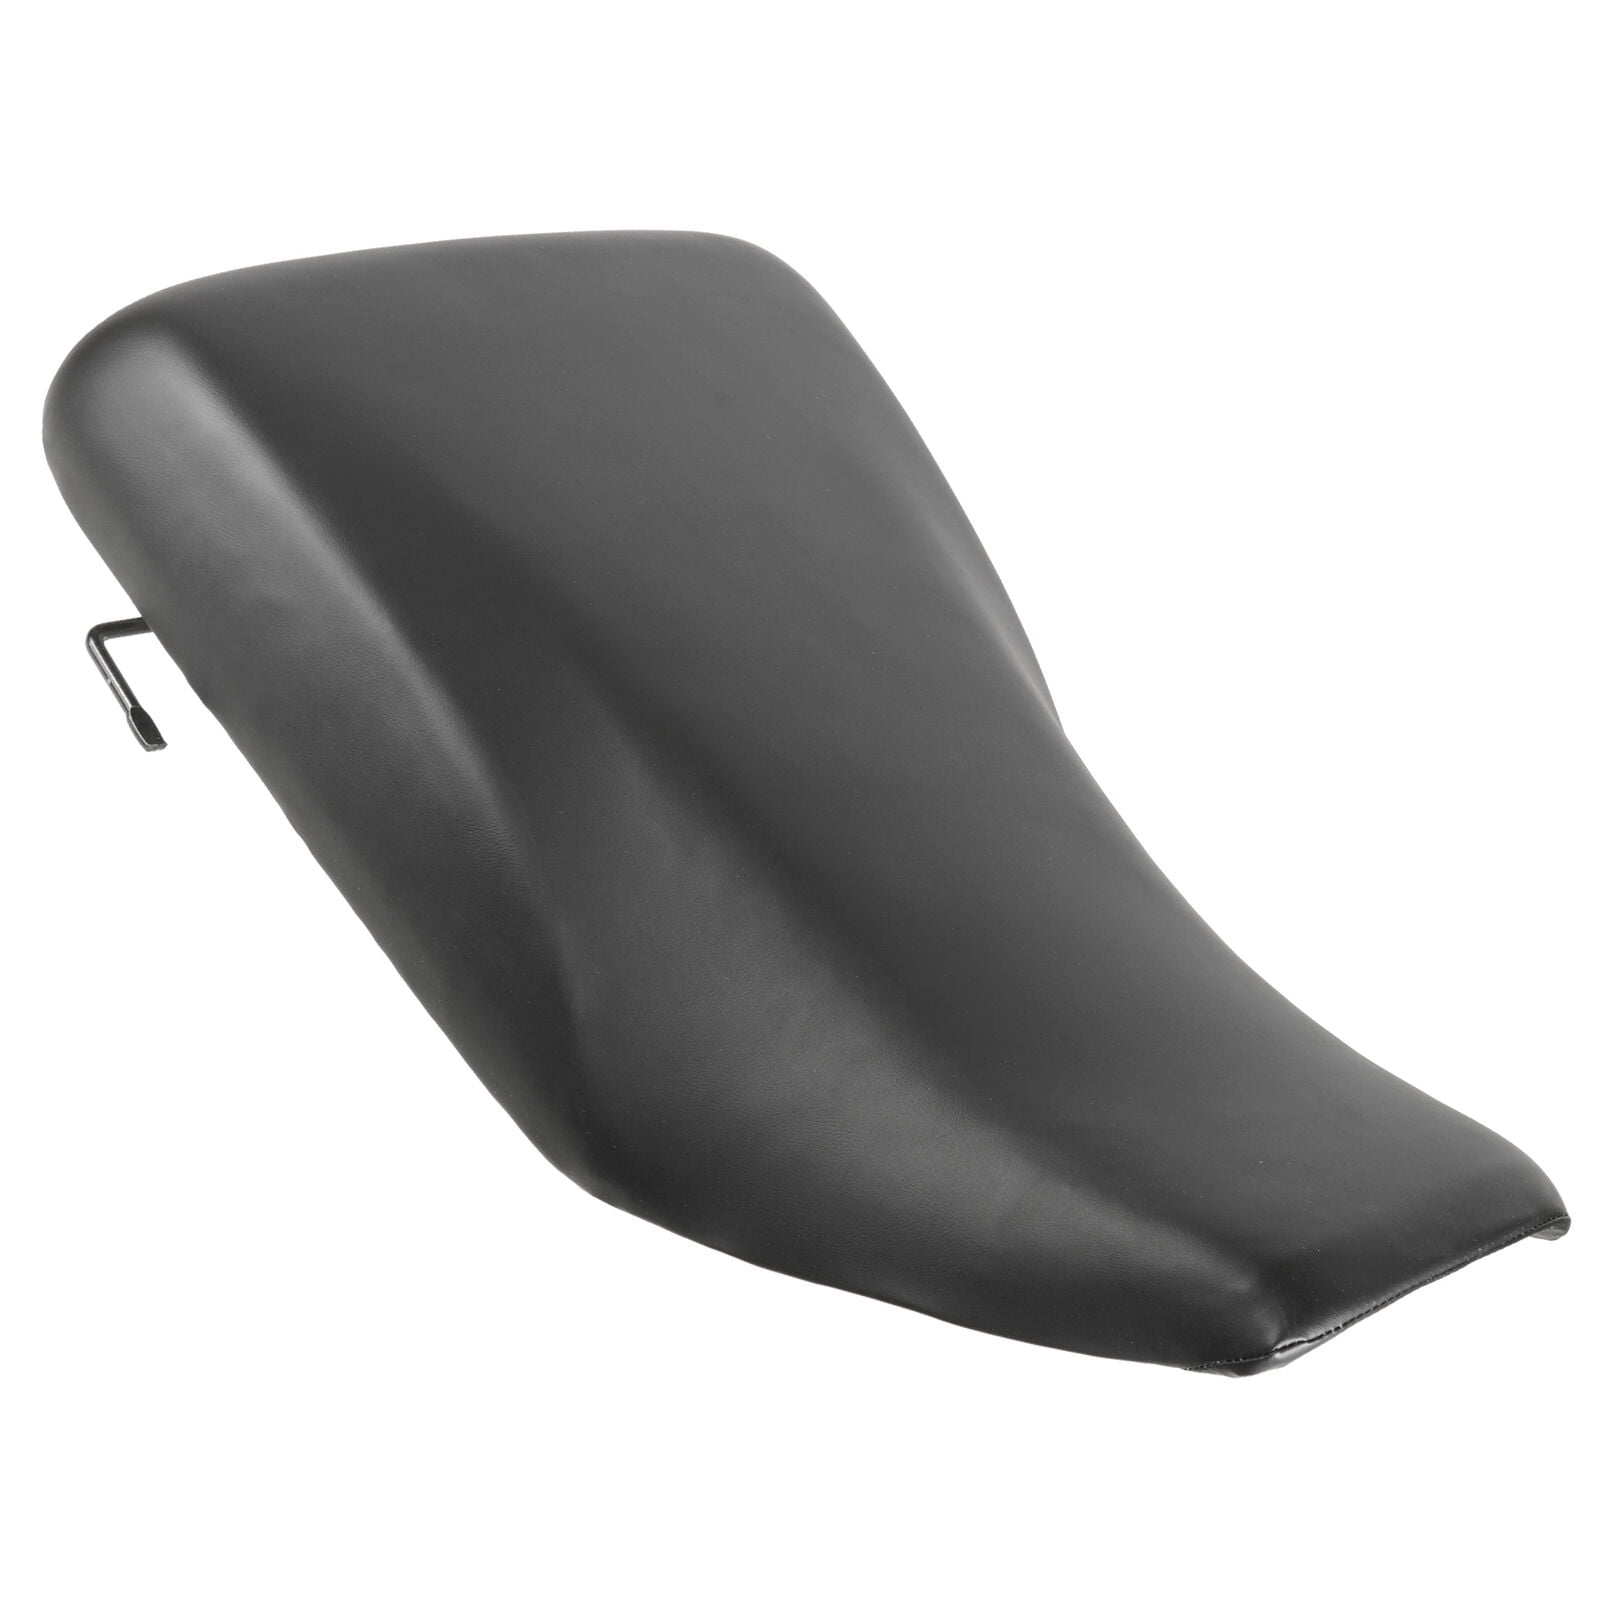 Moto Gear Graphics Seat Cover Compatible With Honda Rancher 350 2001-06 Logo Standard Seat Cover #MGGSL03661 